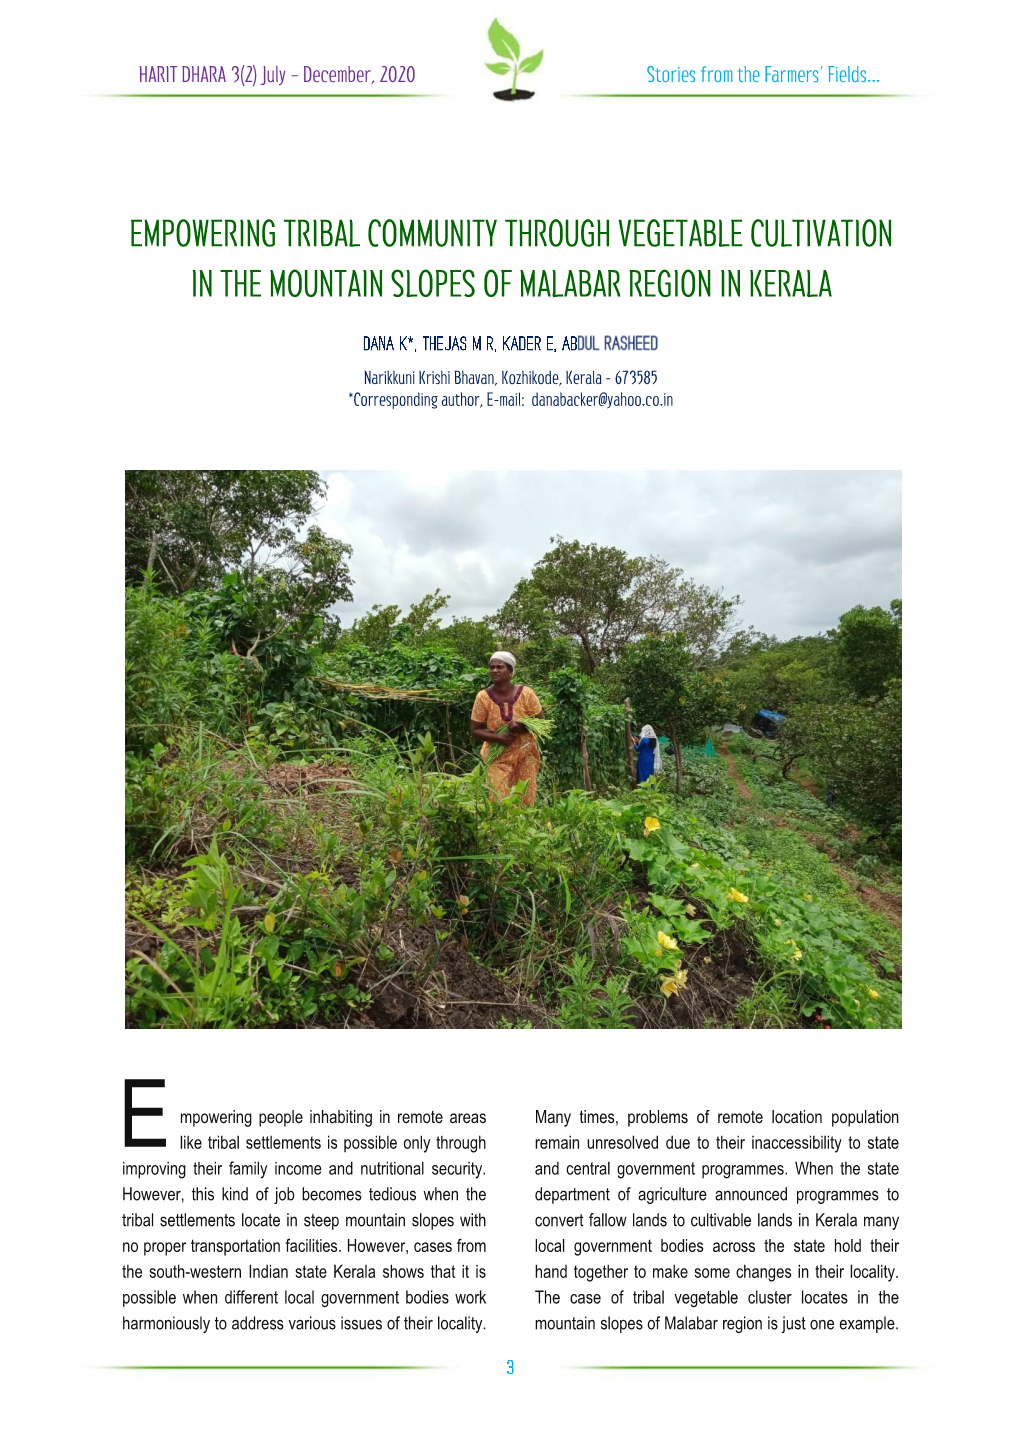 Empowering Tribal Community Through Vegetable Cultivation in the Mountain Slopes of Malabar Region in Kerala